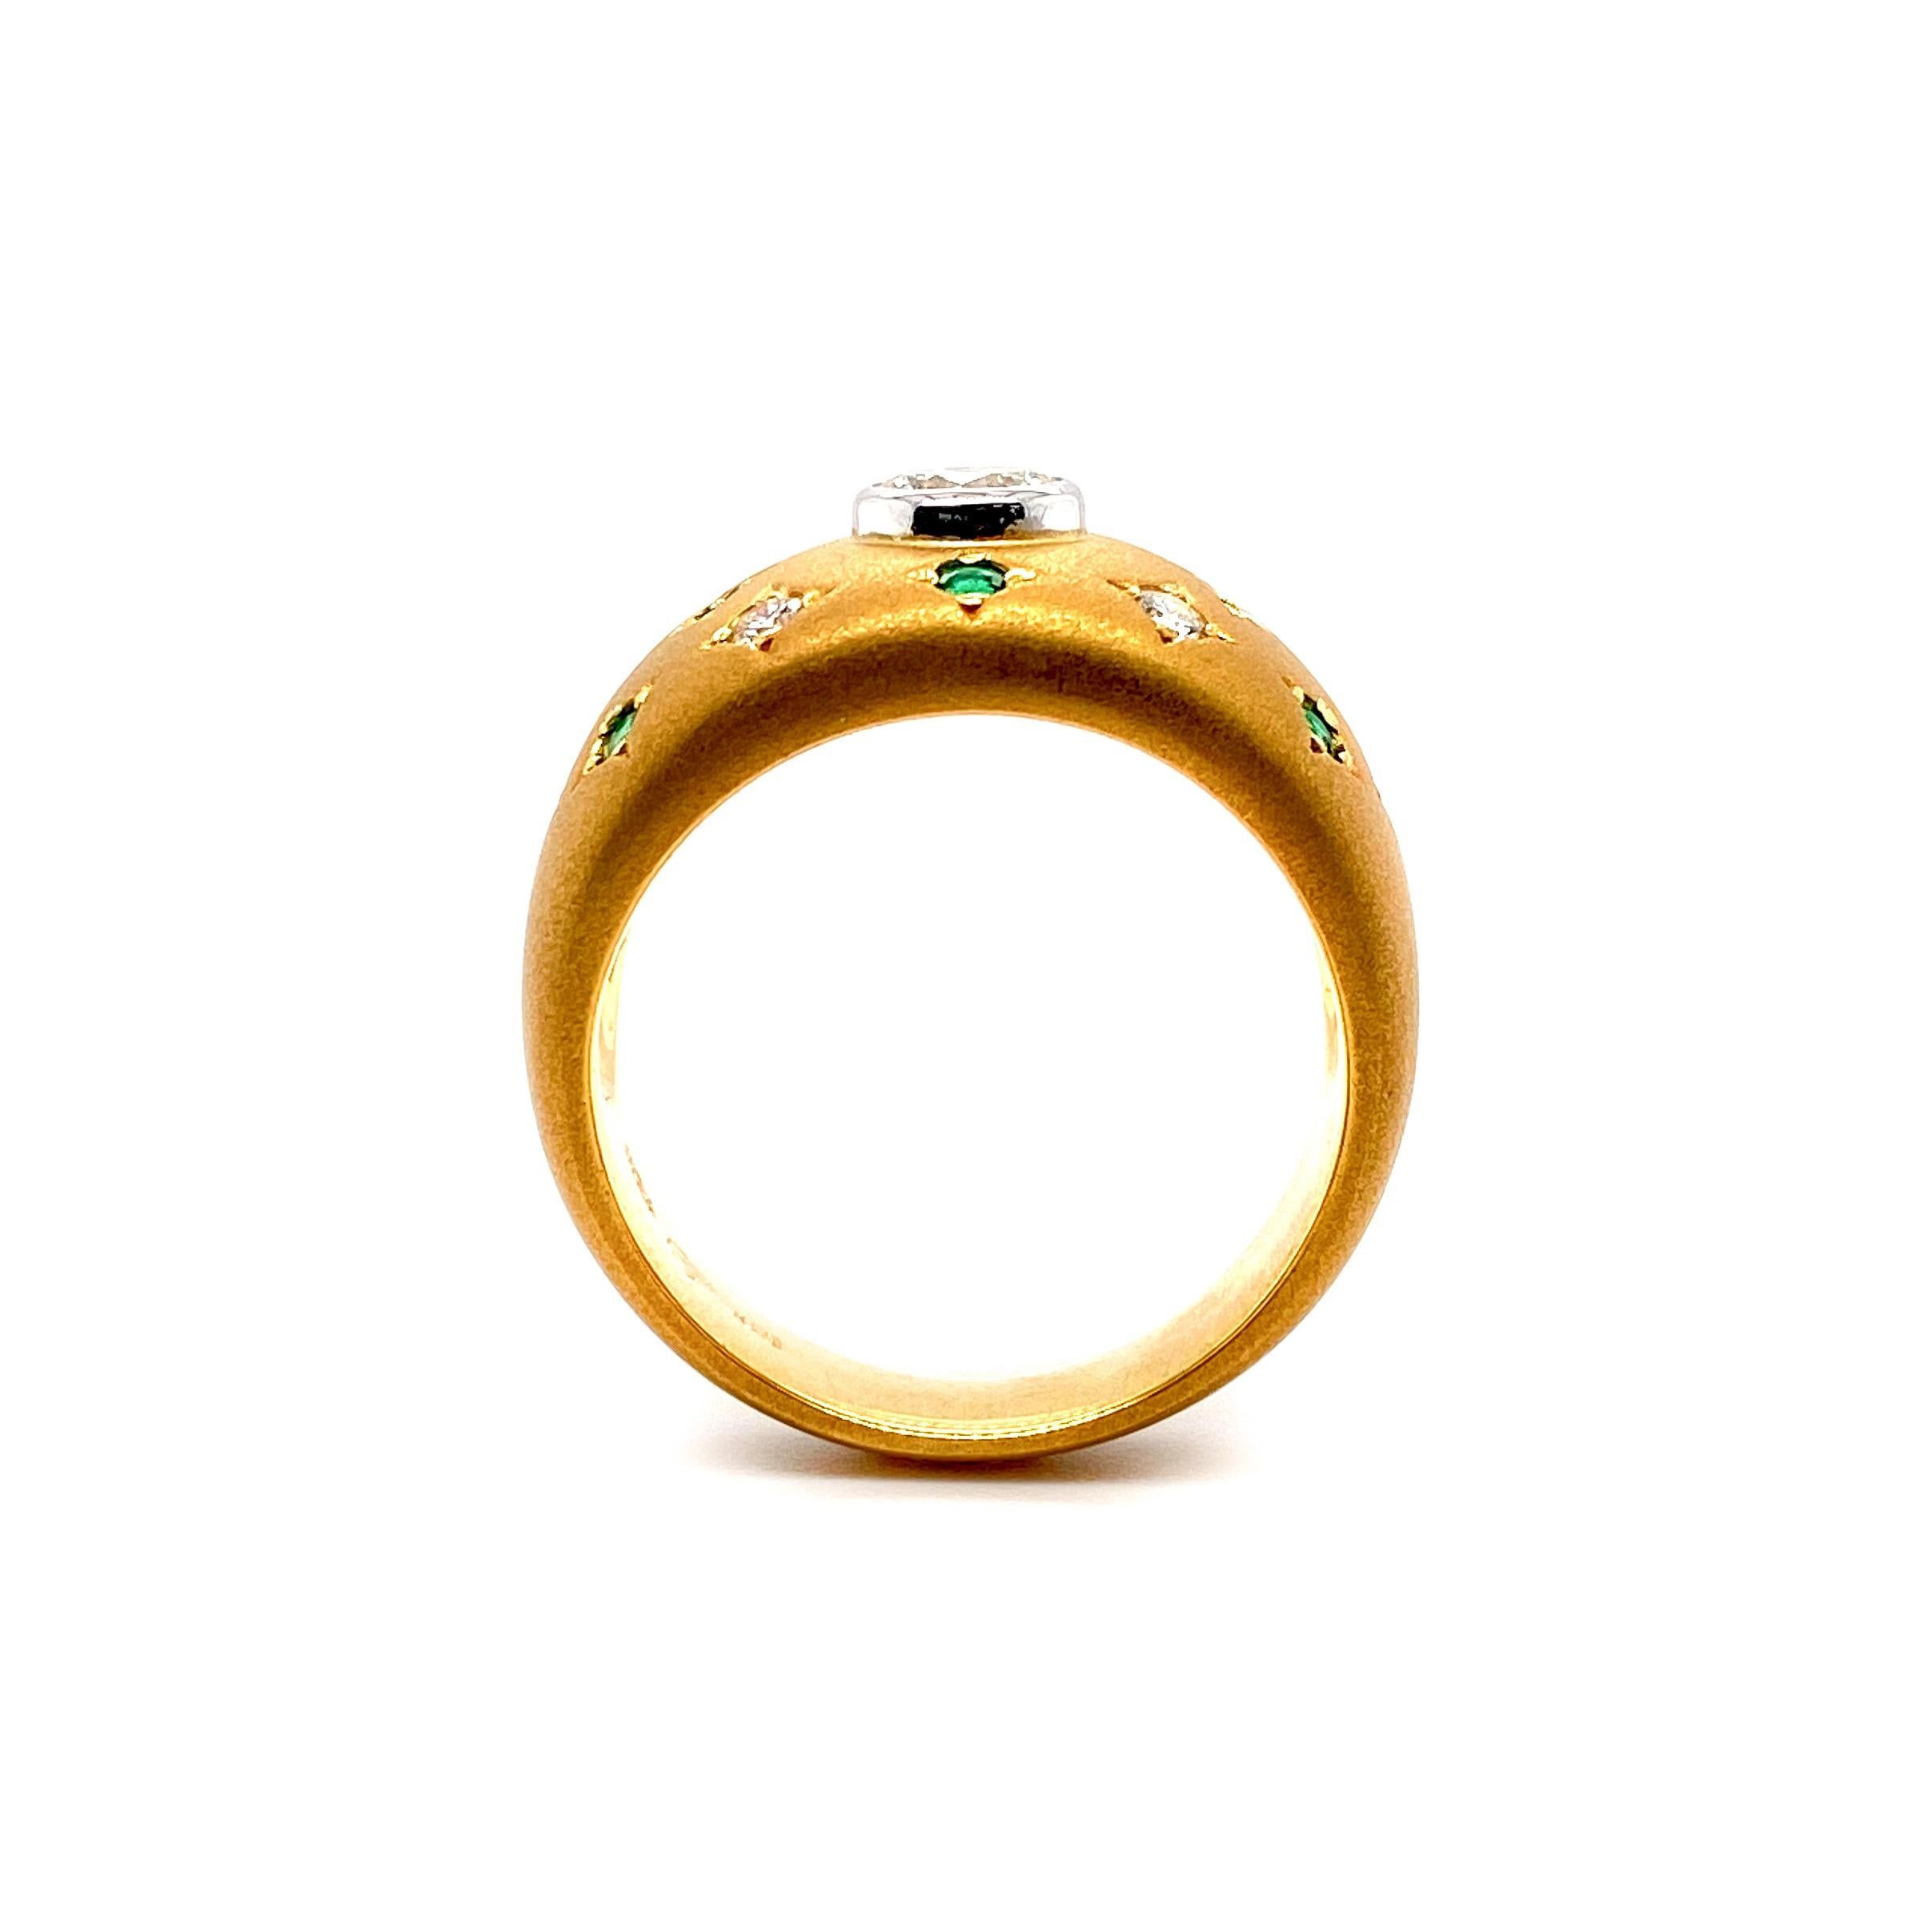 Starry Diamond And Emerald Artisanal Dome Ring In 18 Karat Gold For Sale At  1stdibs In Starry Diamond Dome Rings (View 10 of 25)